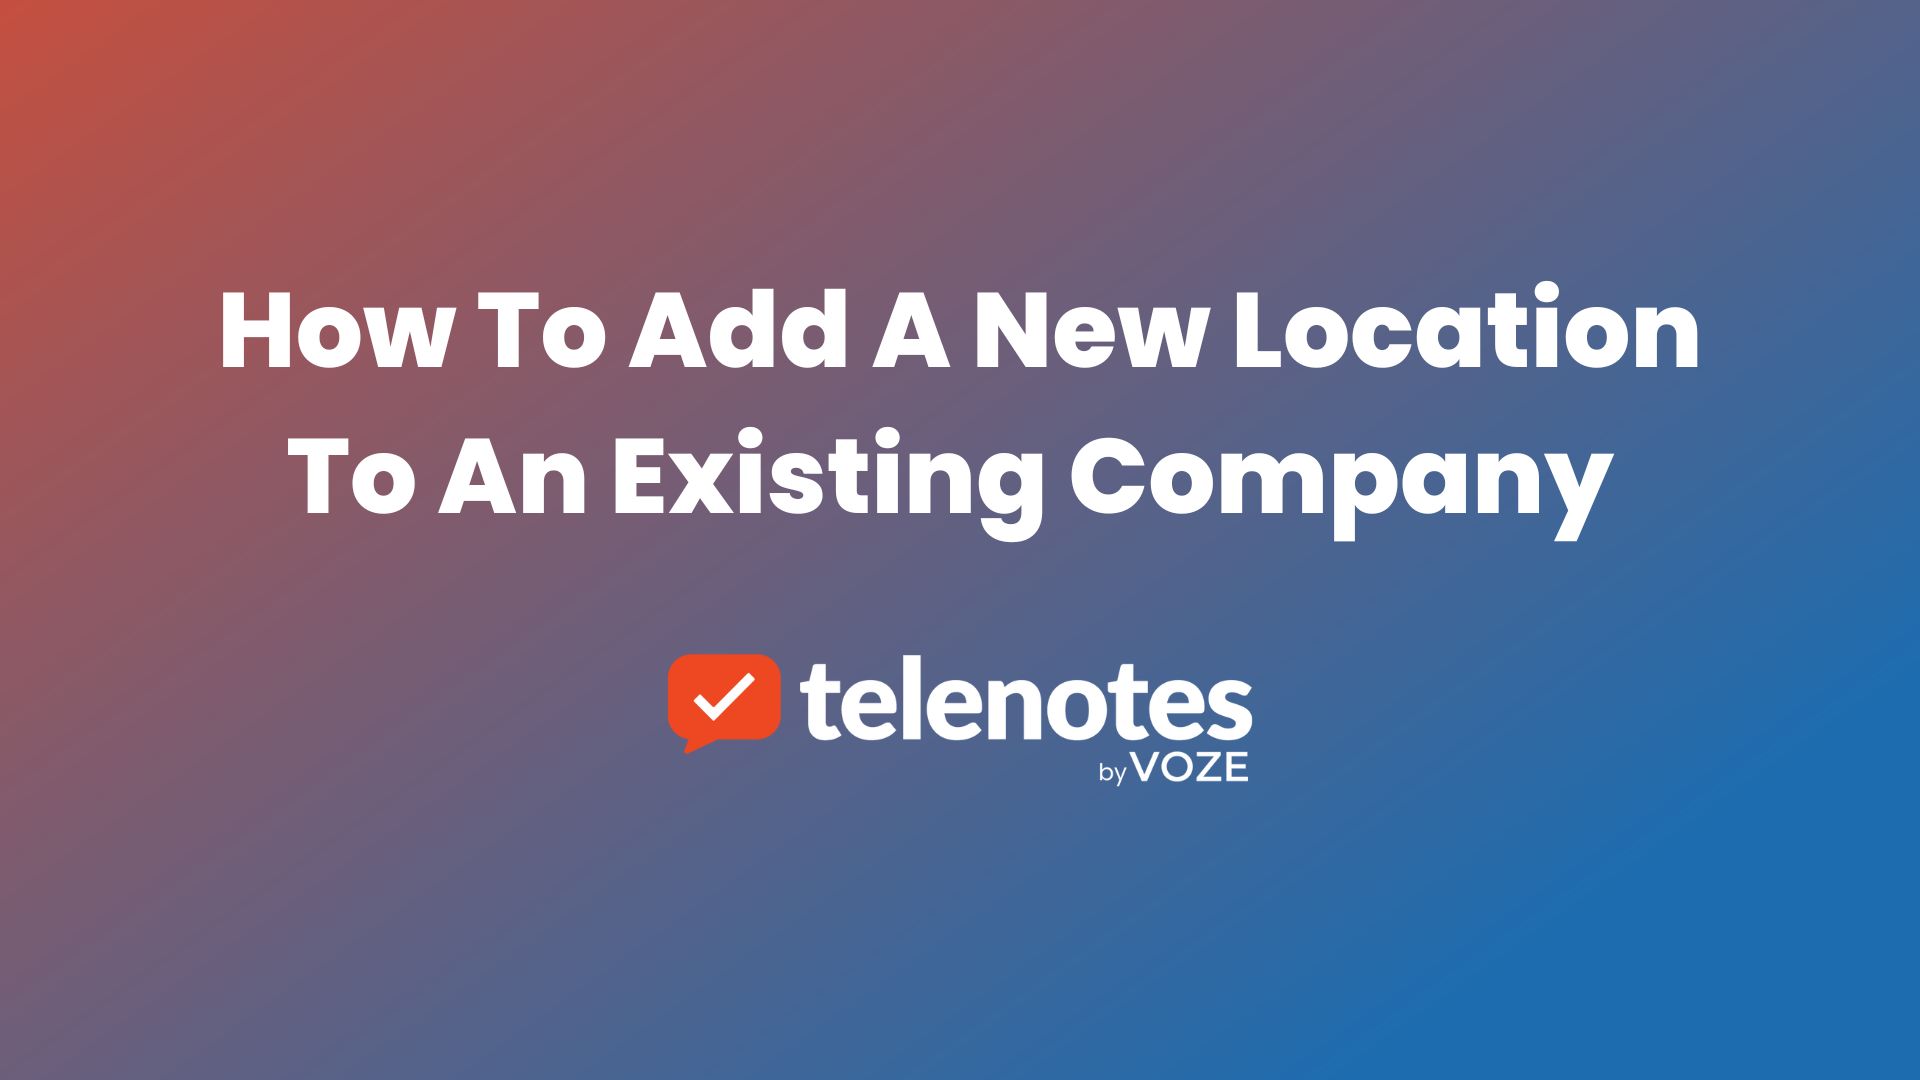 How to Add a New Location to an Existing Company in the Telenotes Mobile App